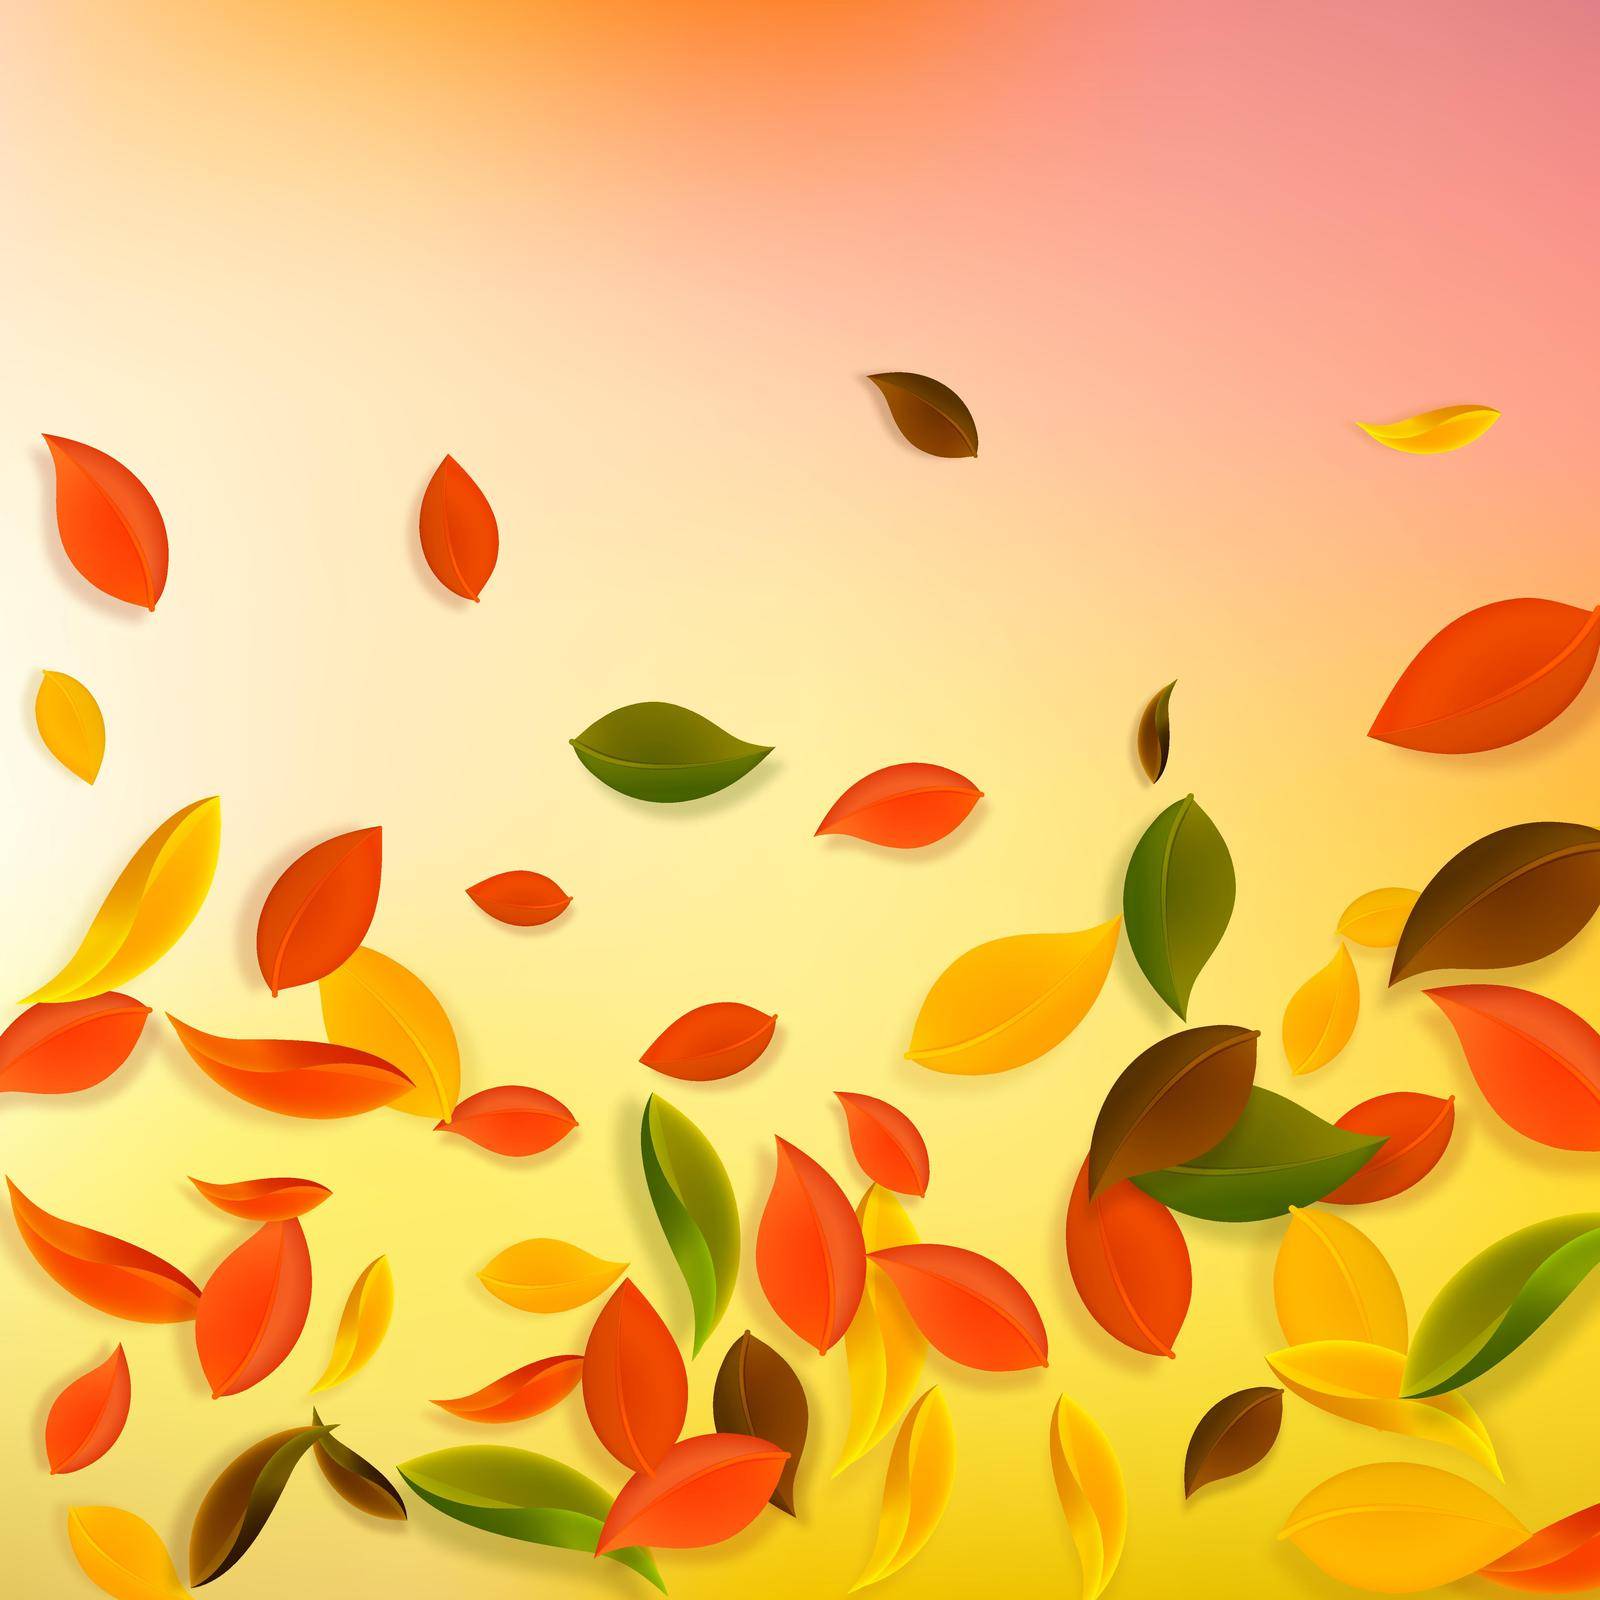 Falling autumn leaves. Red, yellow, green, brown chaotic leaves flying. Falling rain colorful foliage on impressive white background. Breathtaking back to school sale.